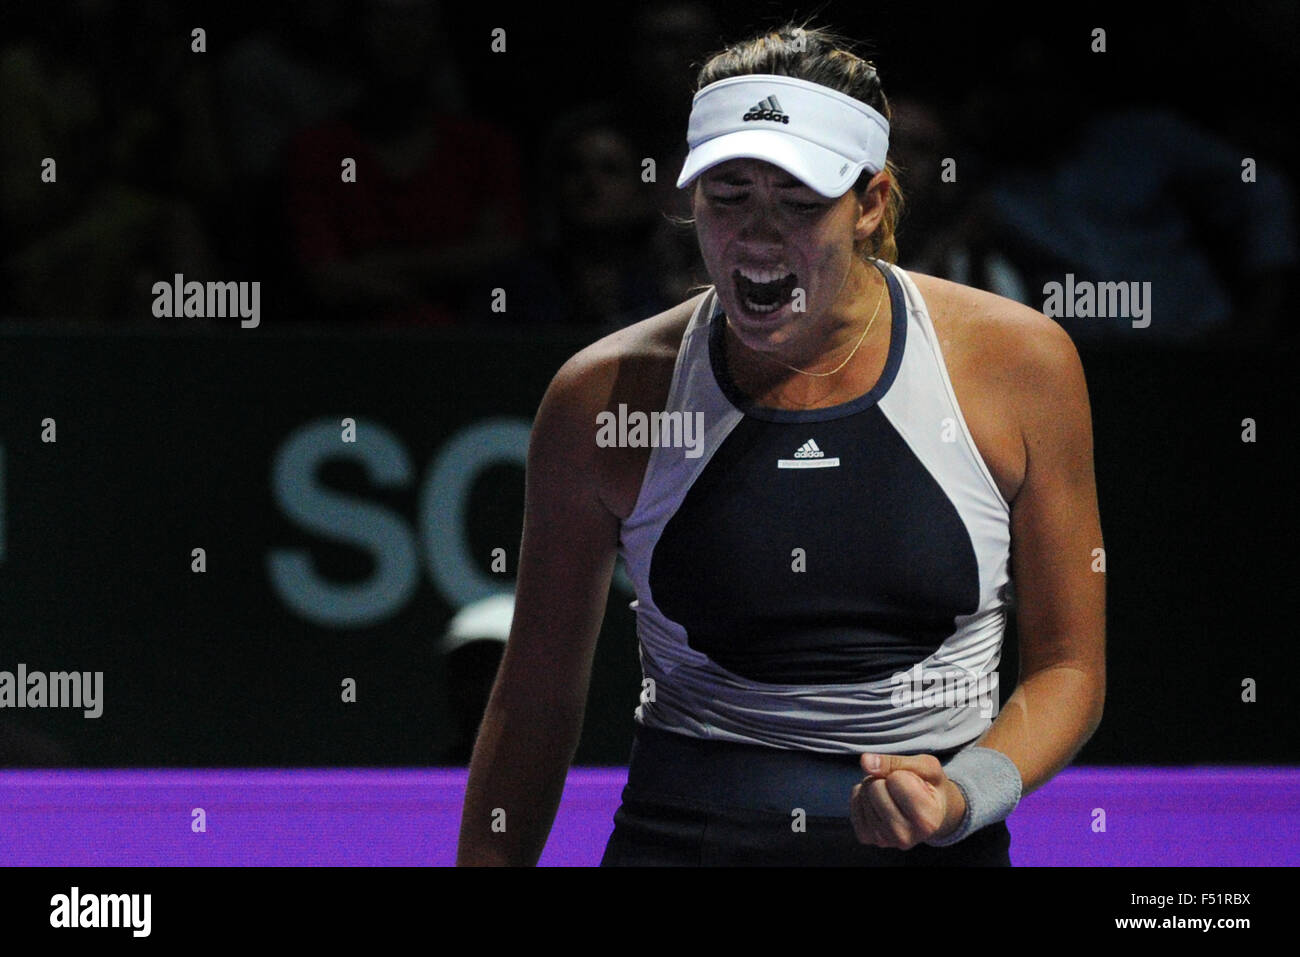 Singapore. 26th Oct, 2015. Garbine Muguruza of Spain reacts during the WTA Finals round robin match against Lucie Safarova of the Czech Republic at Singapore Indoor Stadium in Singapore, Oct. 26, 2015. Garbine Muguruza won 2-0. Credit:  Then Chih Wey/Xinhua/Alamy Live News Stock Photo